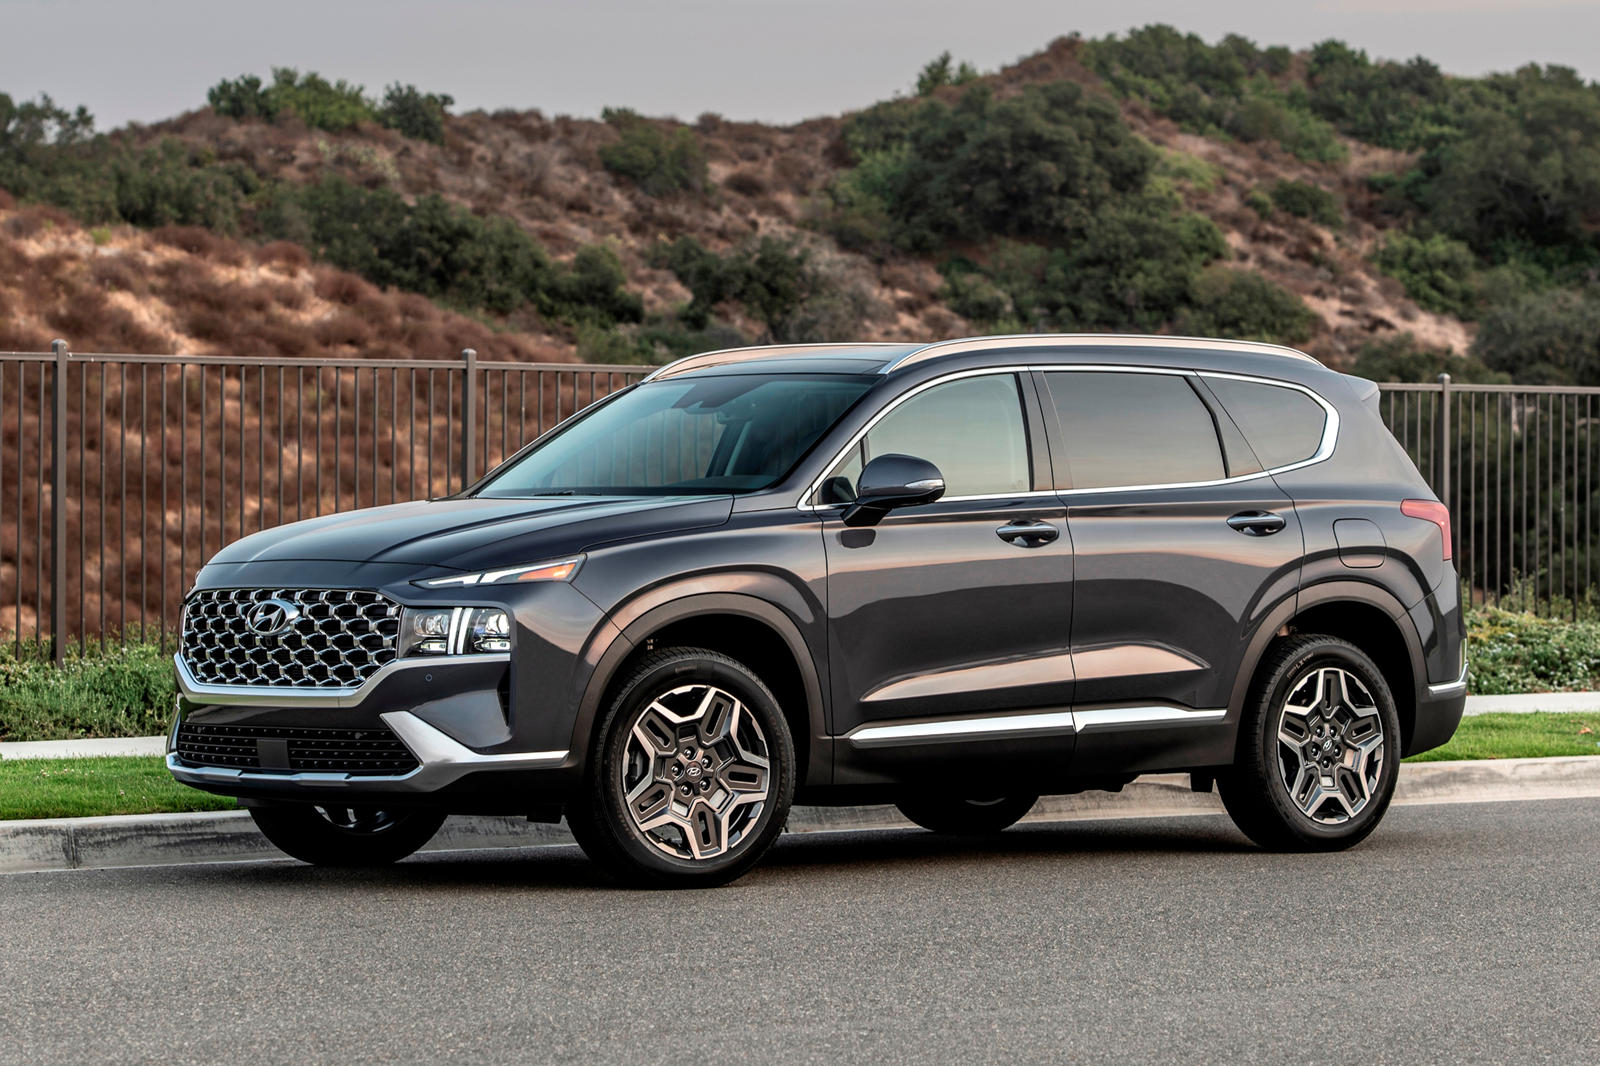 2021 Hyundai Santa Fe Arrives In America With Bold New Styling  CarBuzz